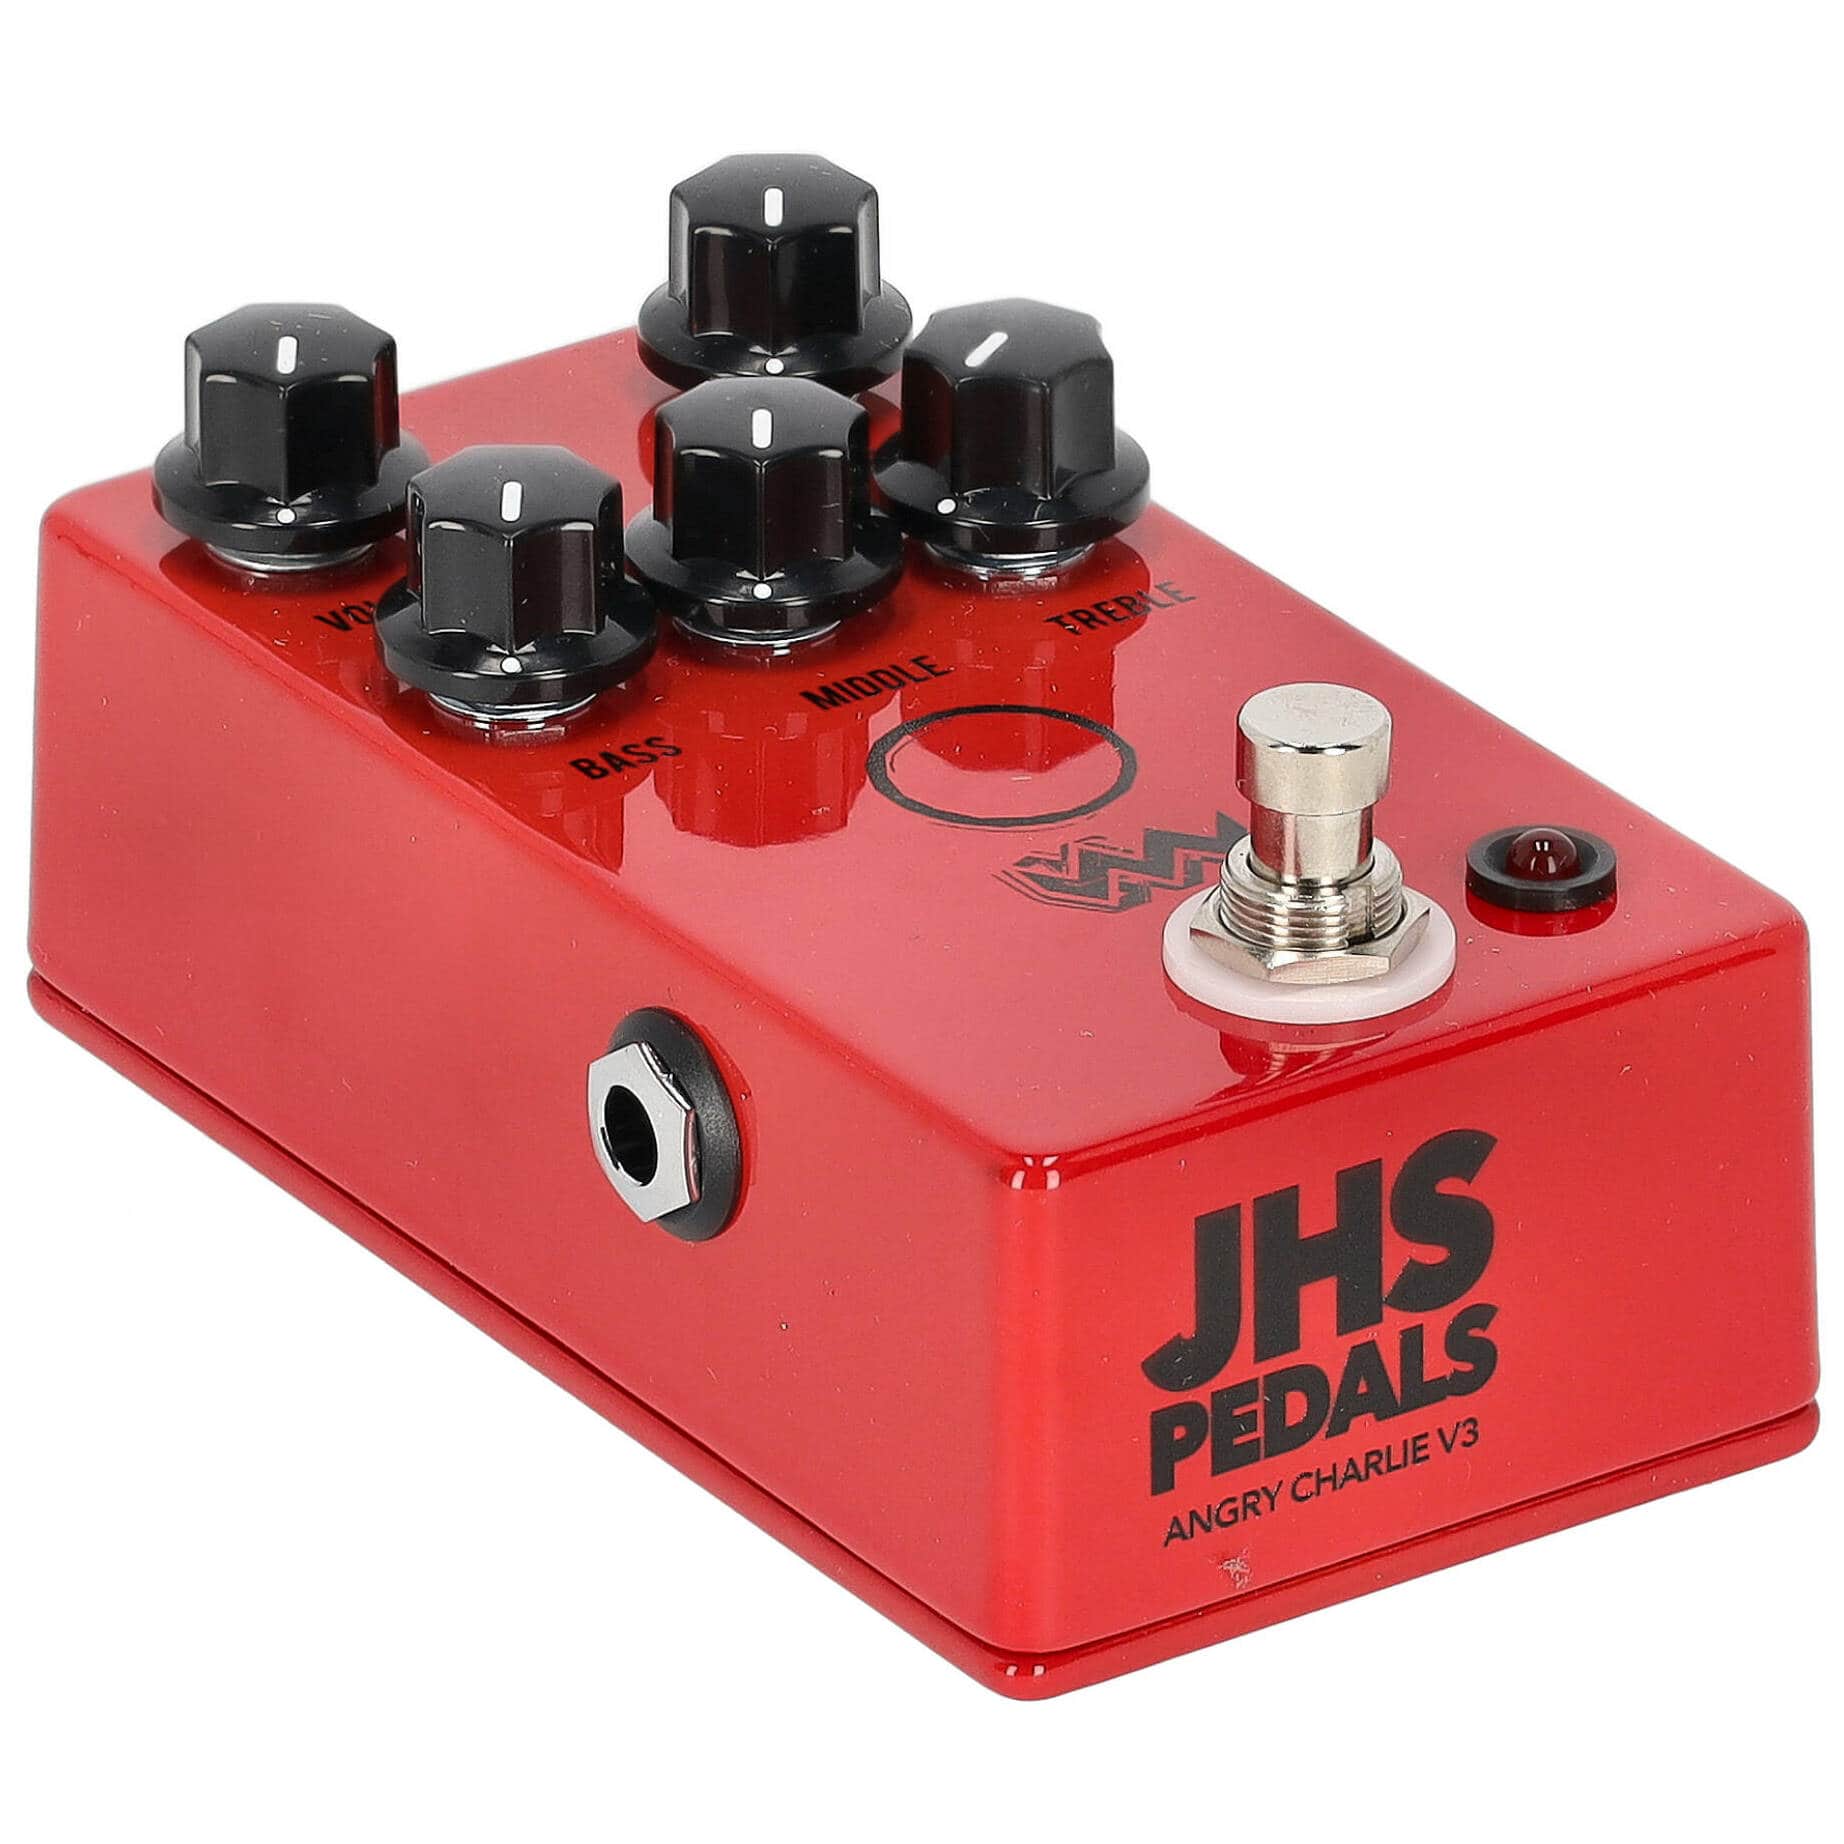 JHS Pedals Angry Charlie V3 - Distortion 2